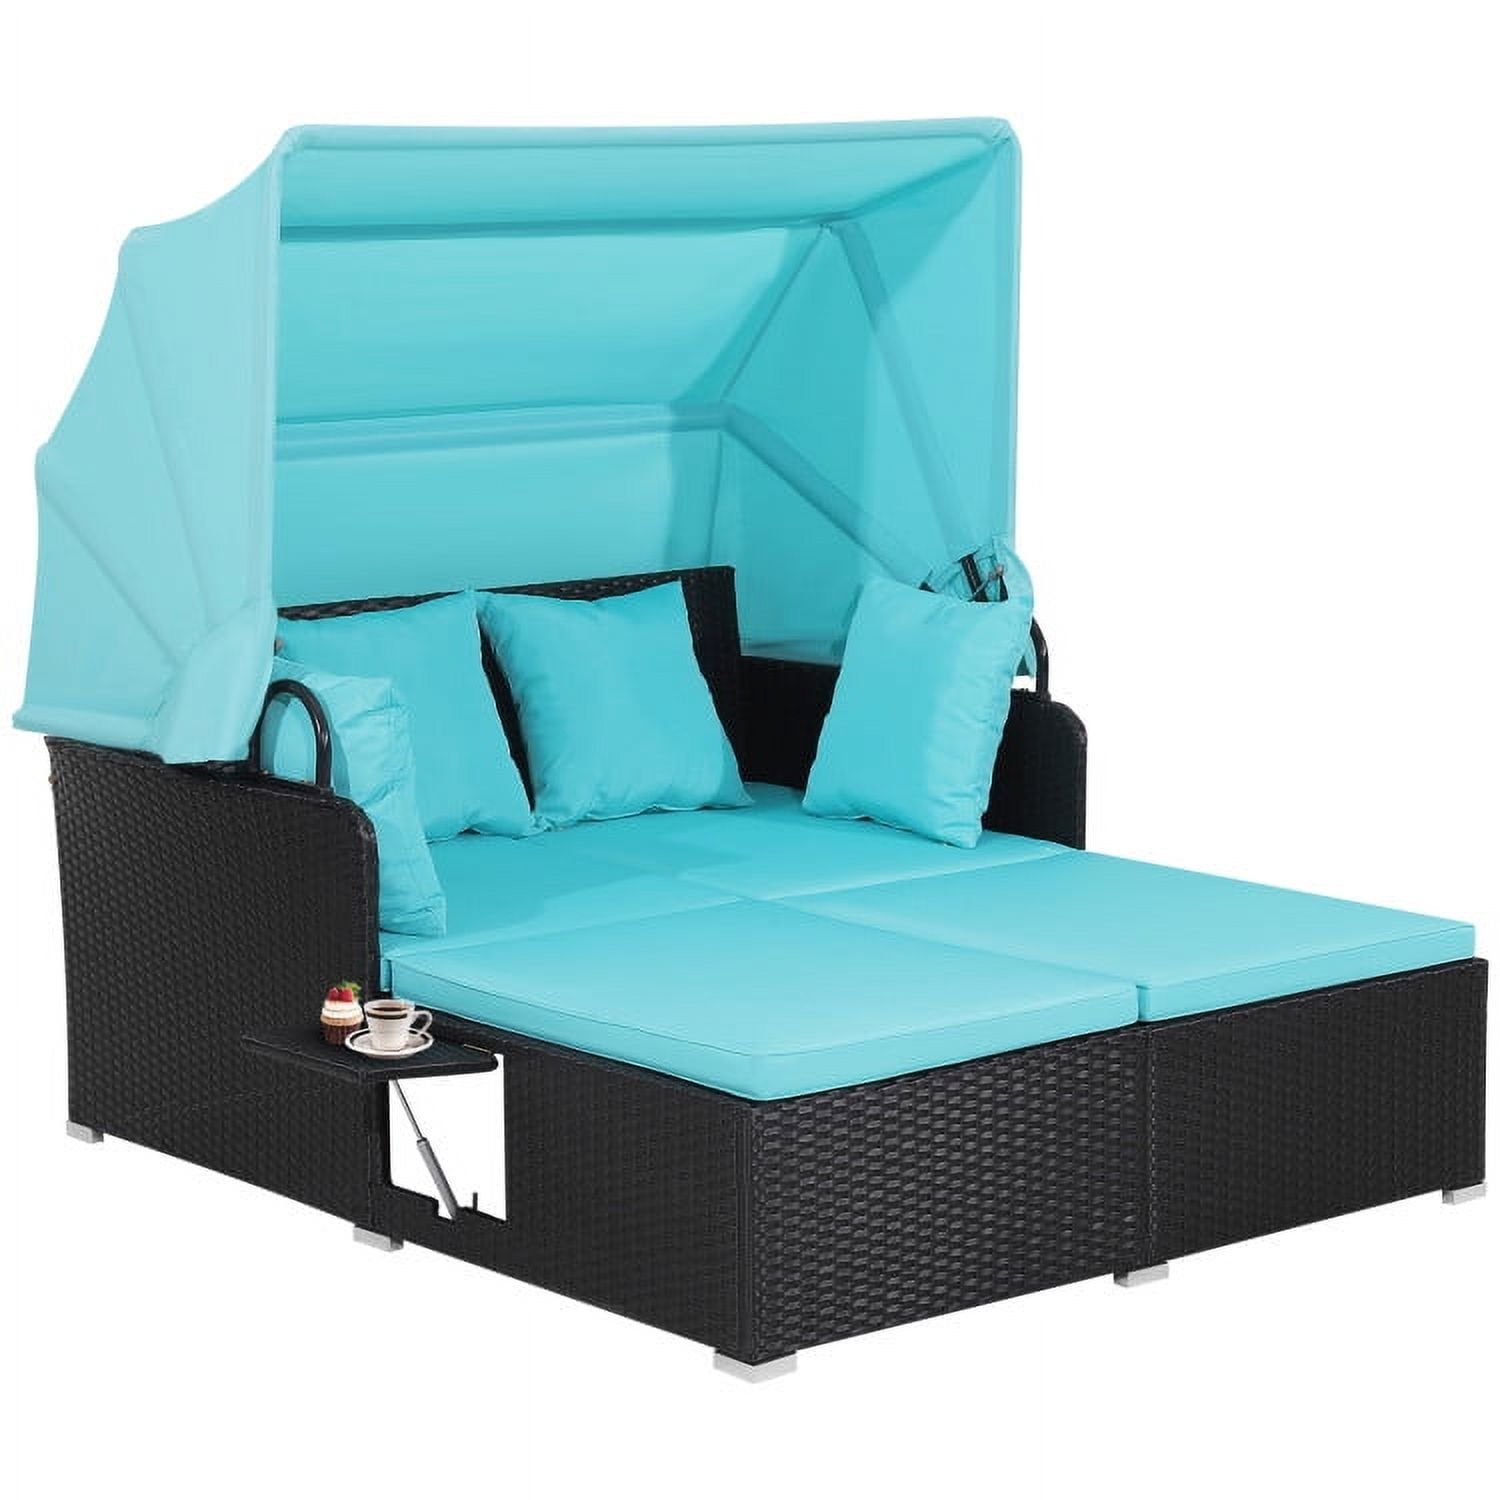 Resenkos Outdoor Patio Rattan Wicker Daybed Sectional Conversation Lounger Set with Retractable Canopy, Foldable Side Table, Turquoise Resistant Cushions